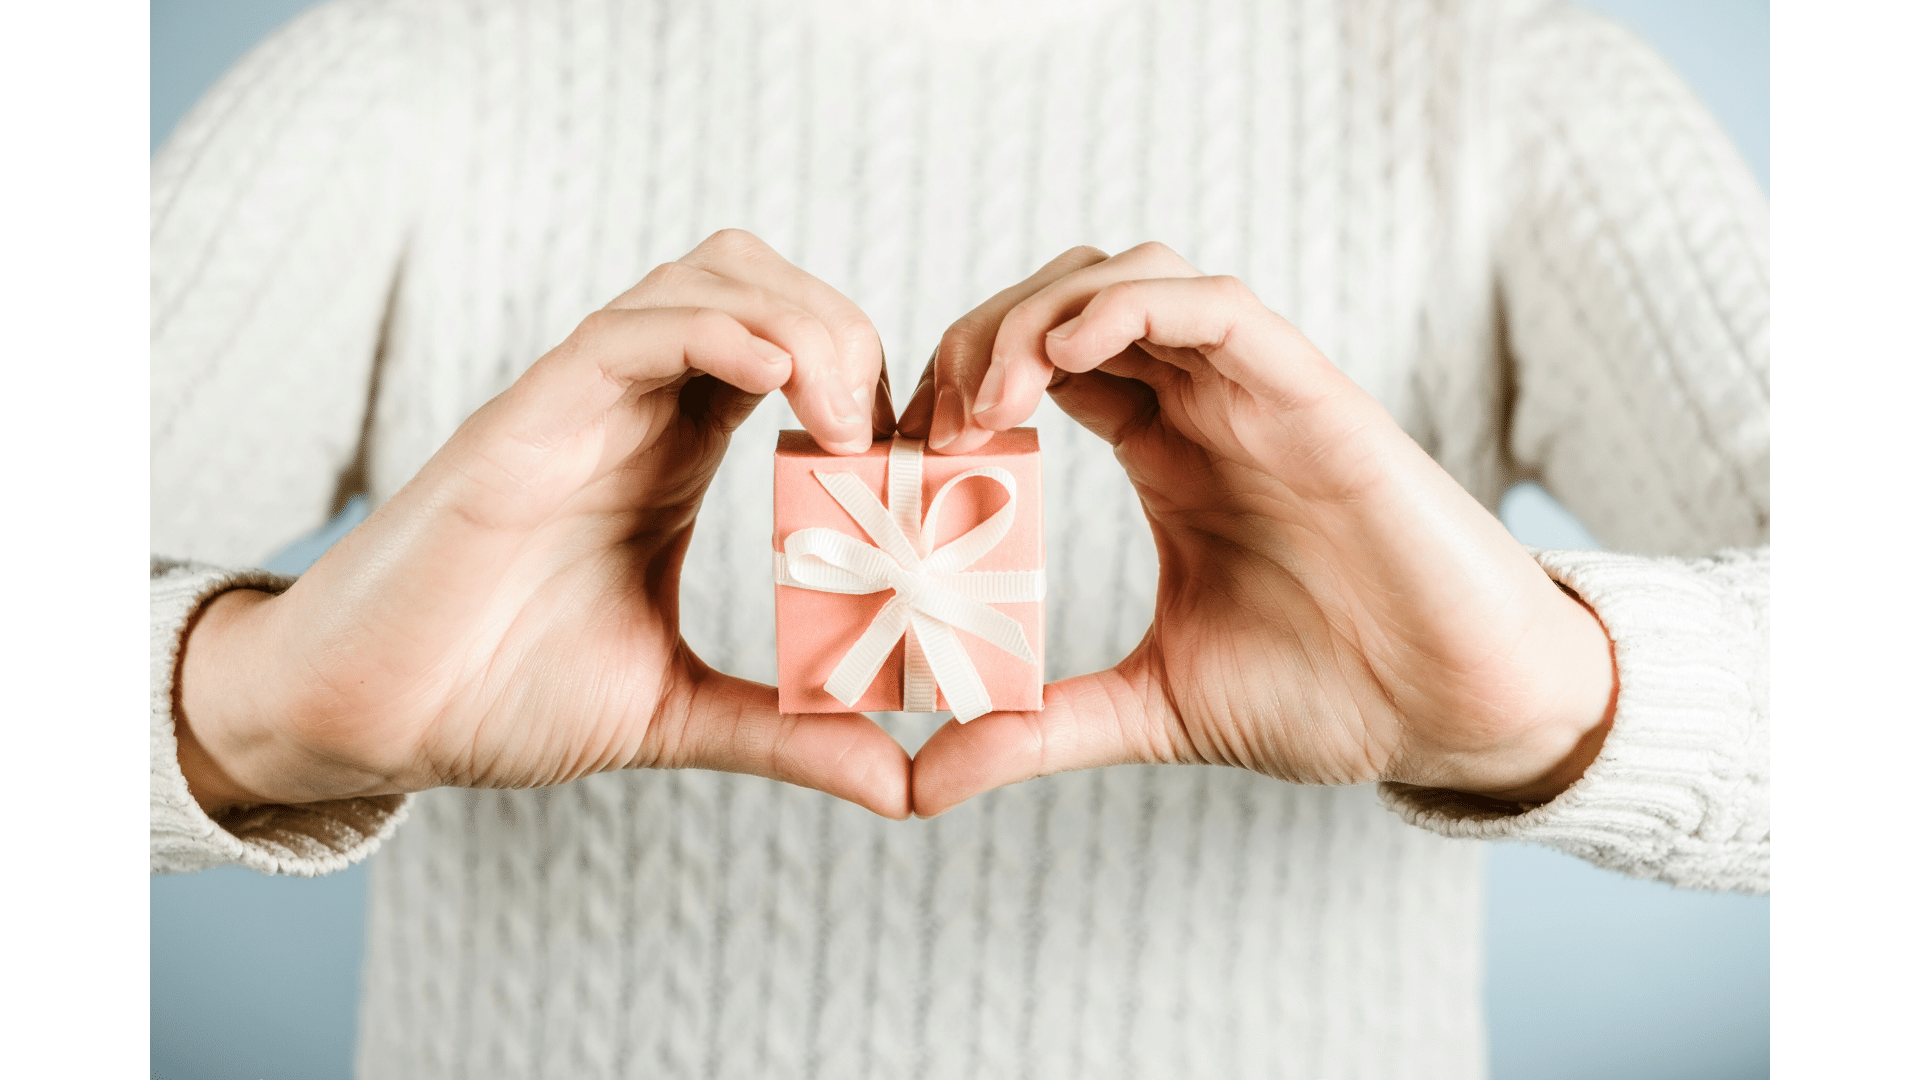 Woman holding a small gift box with a white ribbon, forming a heart shape with her hands around it highlighting unique gift ideas.